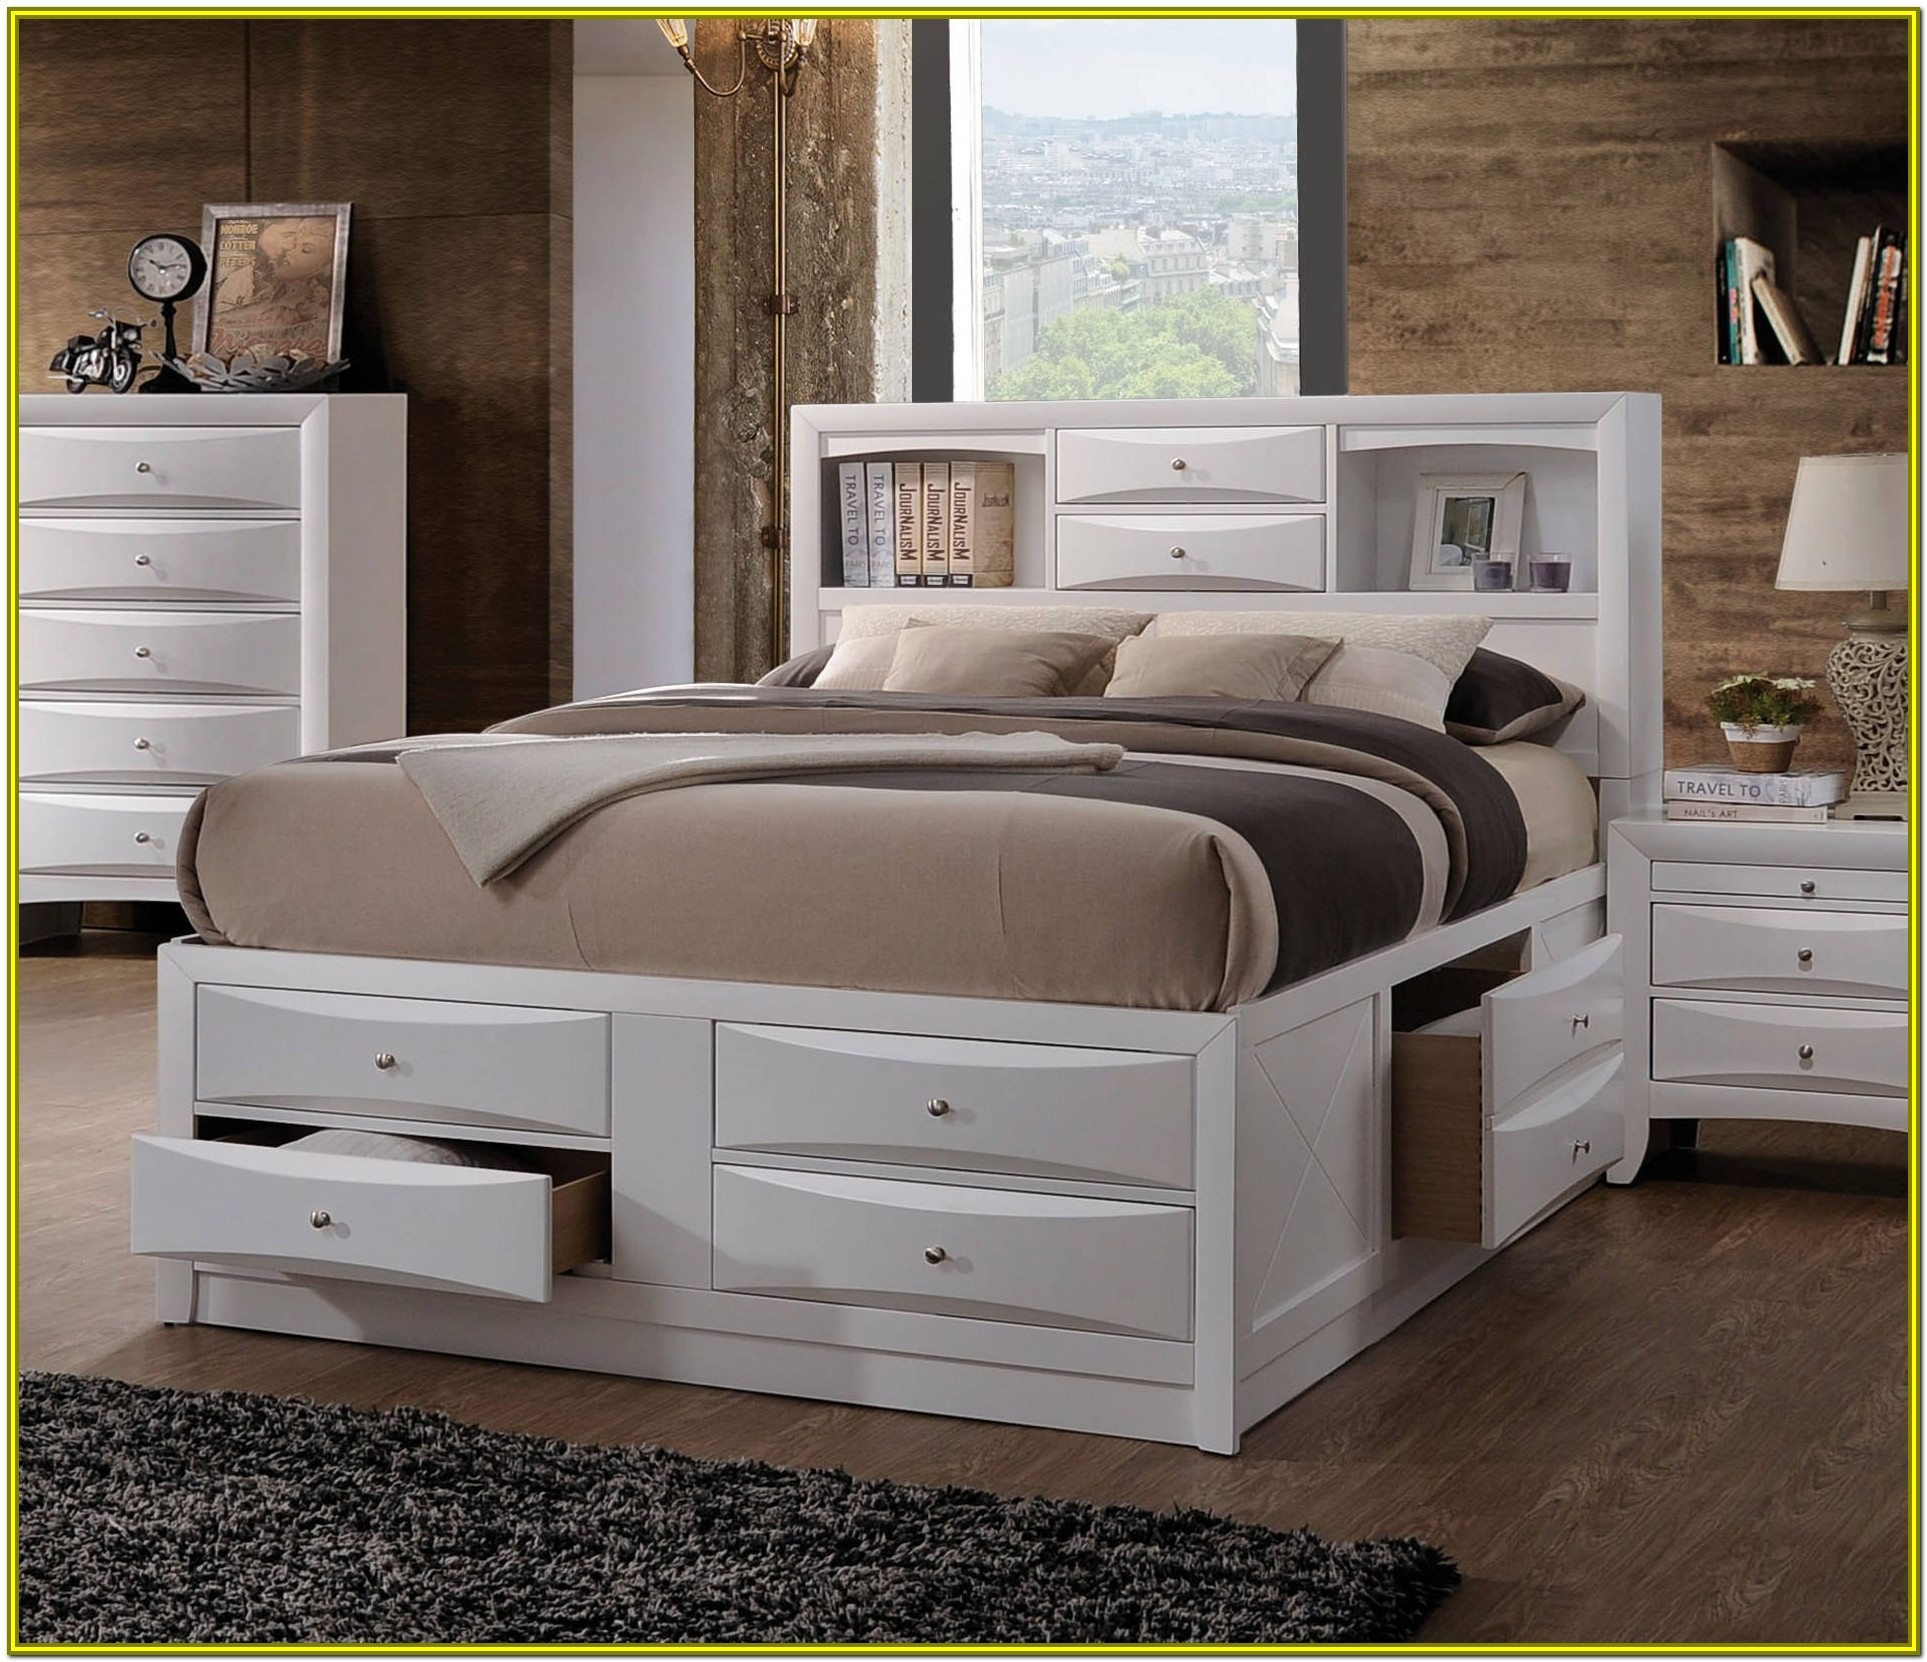 Platform Bed With Drawers Visualhunt, Platform Bed Frame With Drawers